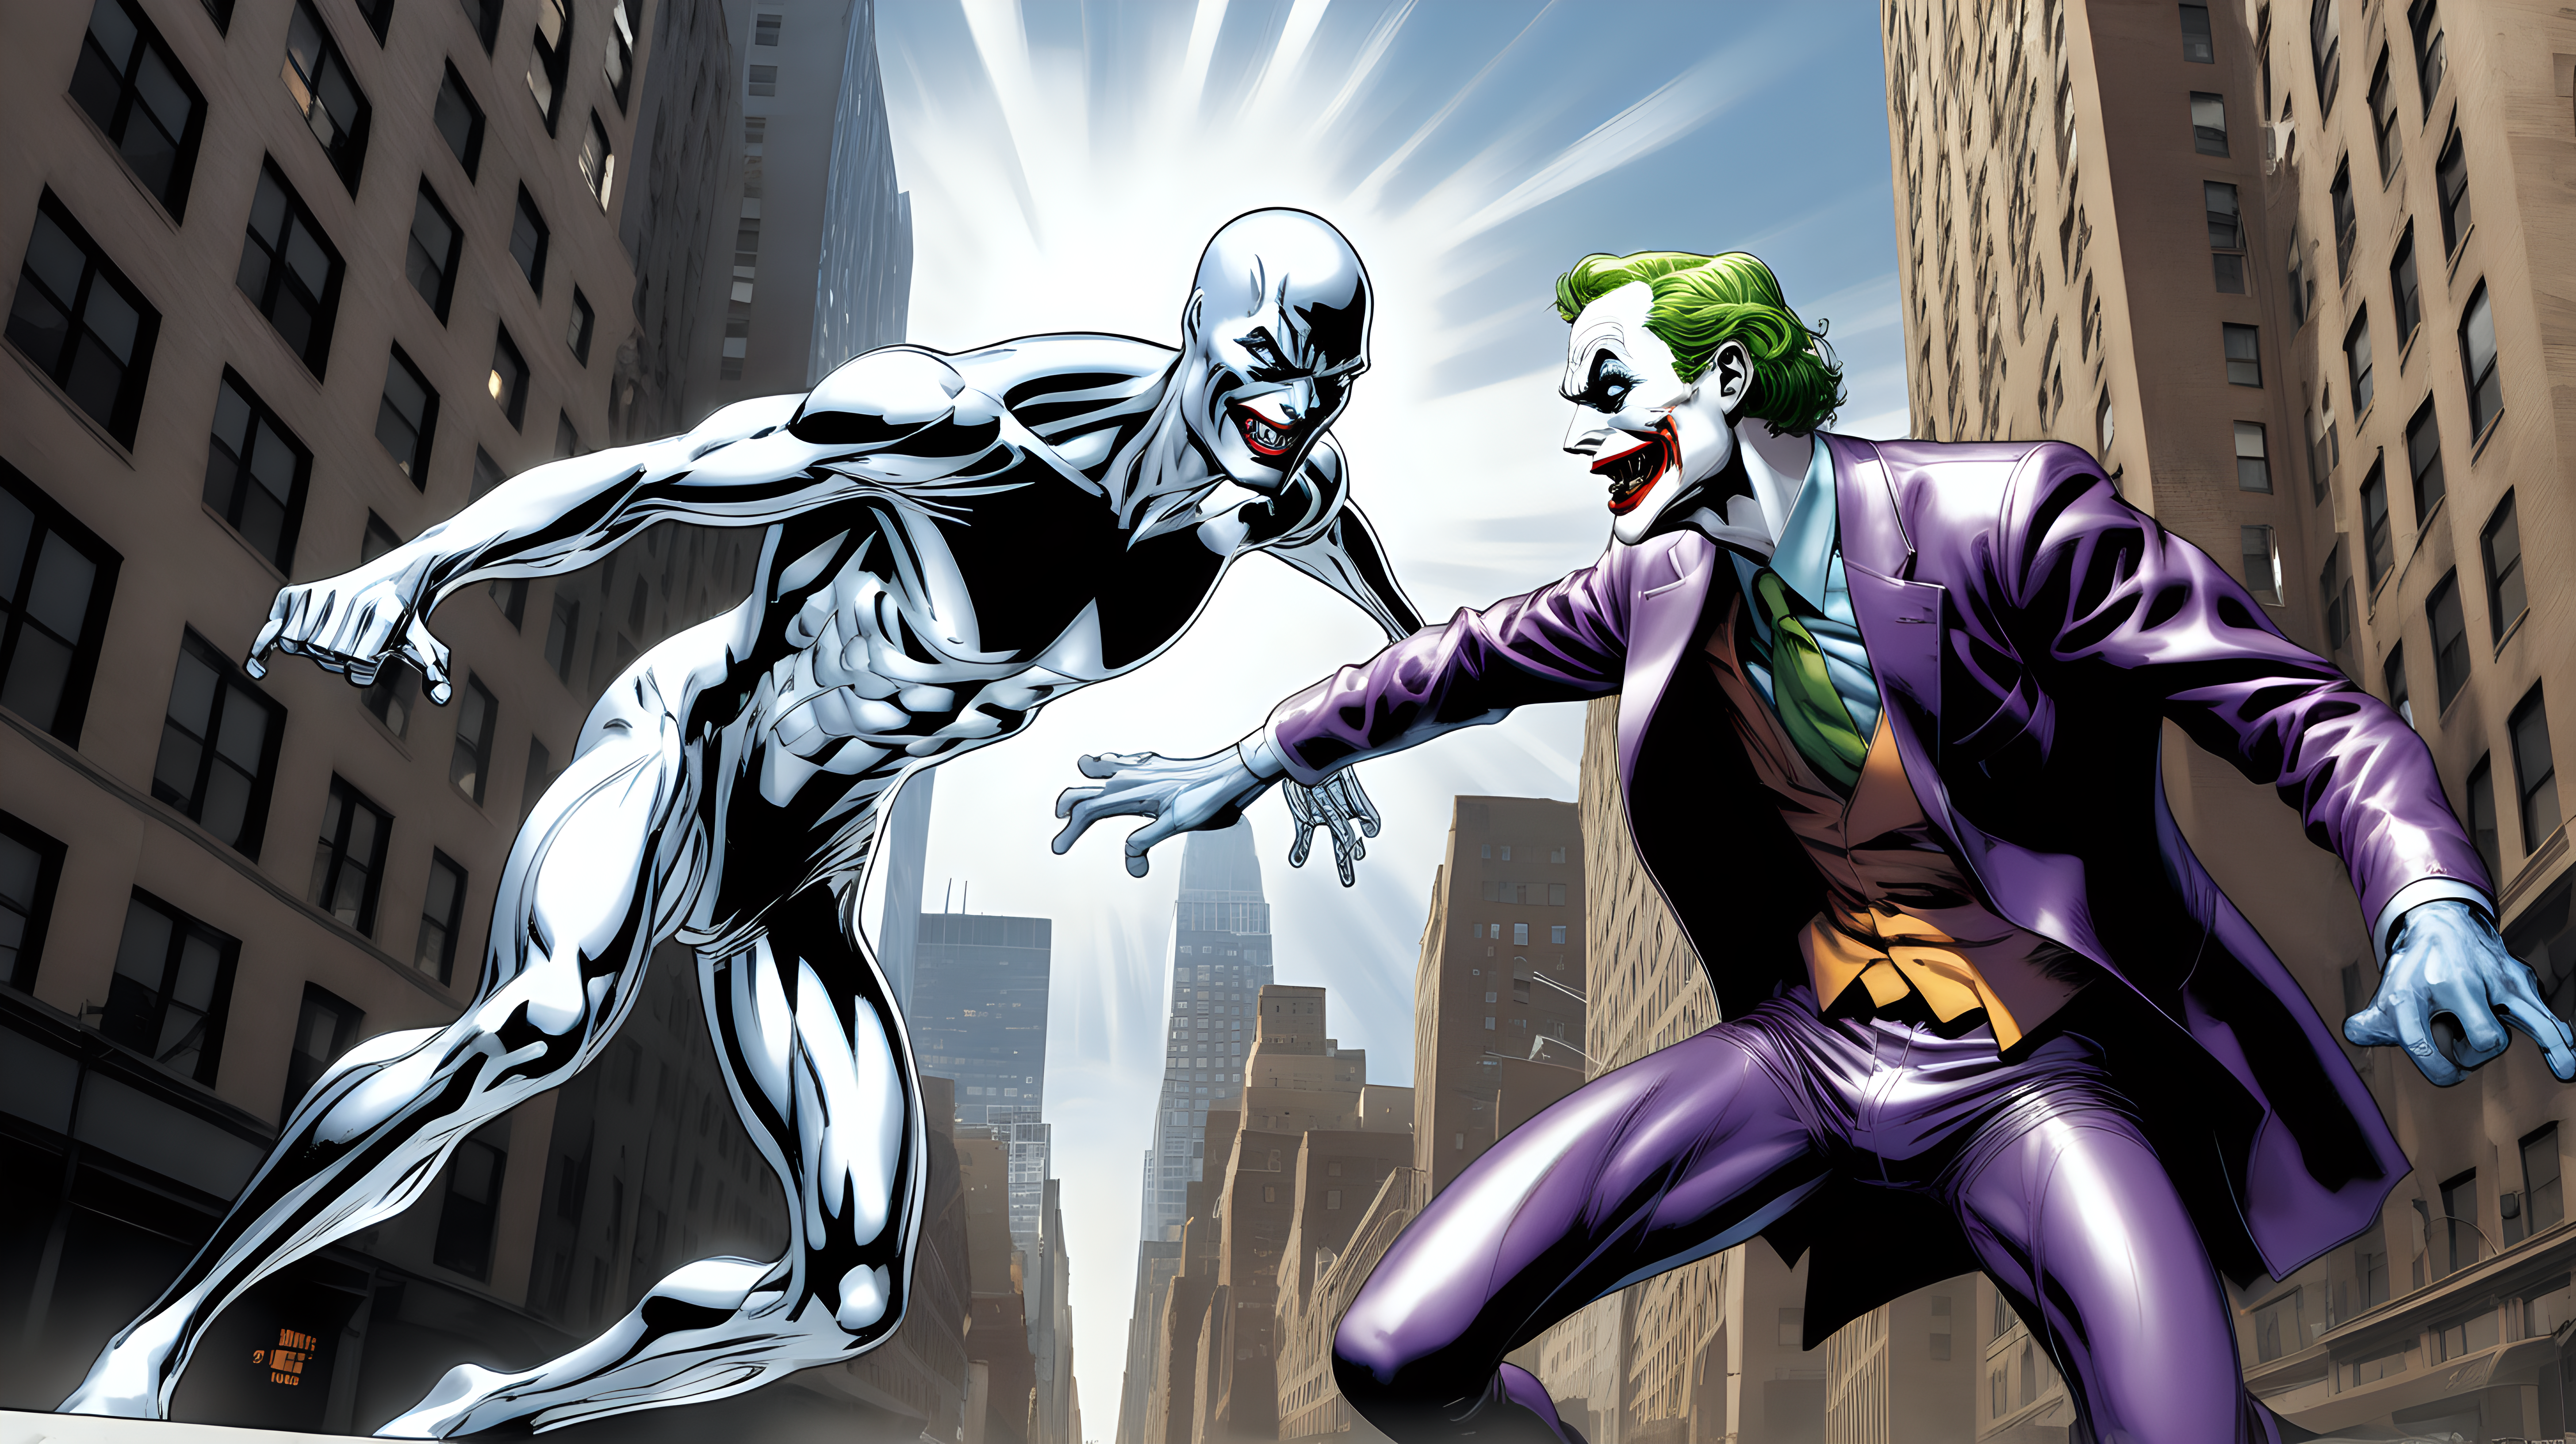 The silver surfer fights the joker in NYC